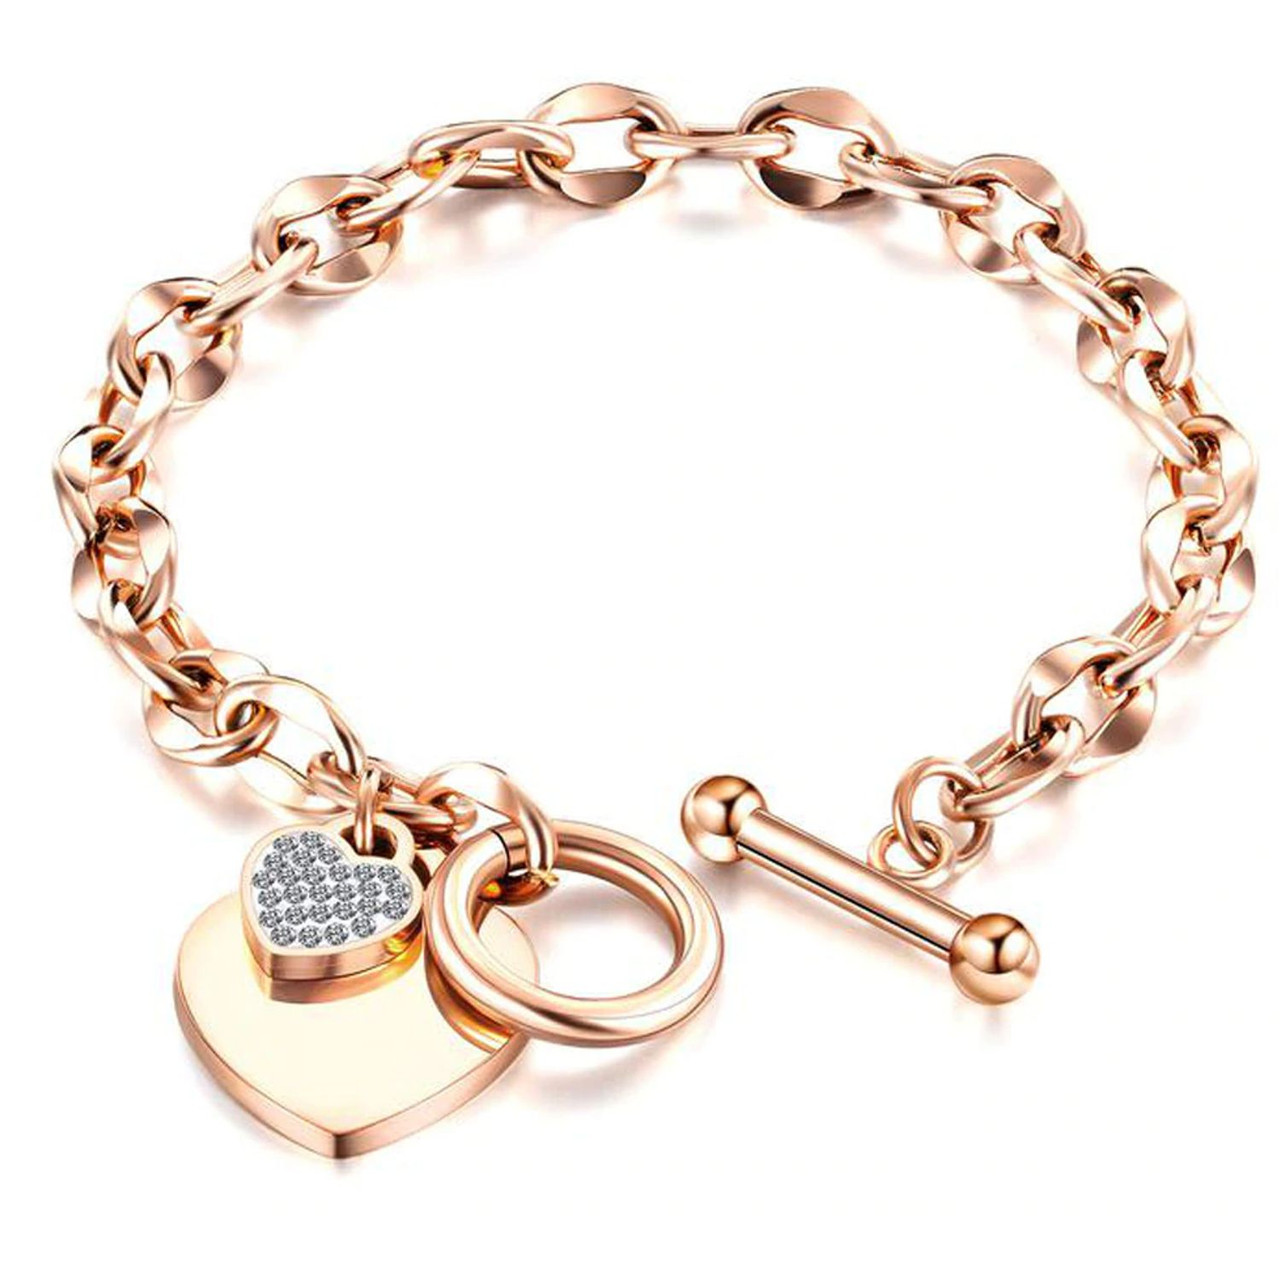 Personalized Quality Stainless Steel Love Heart Charm Bracelet ...